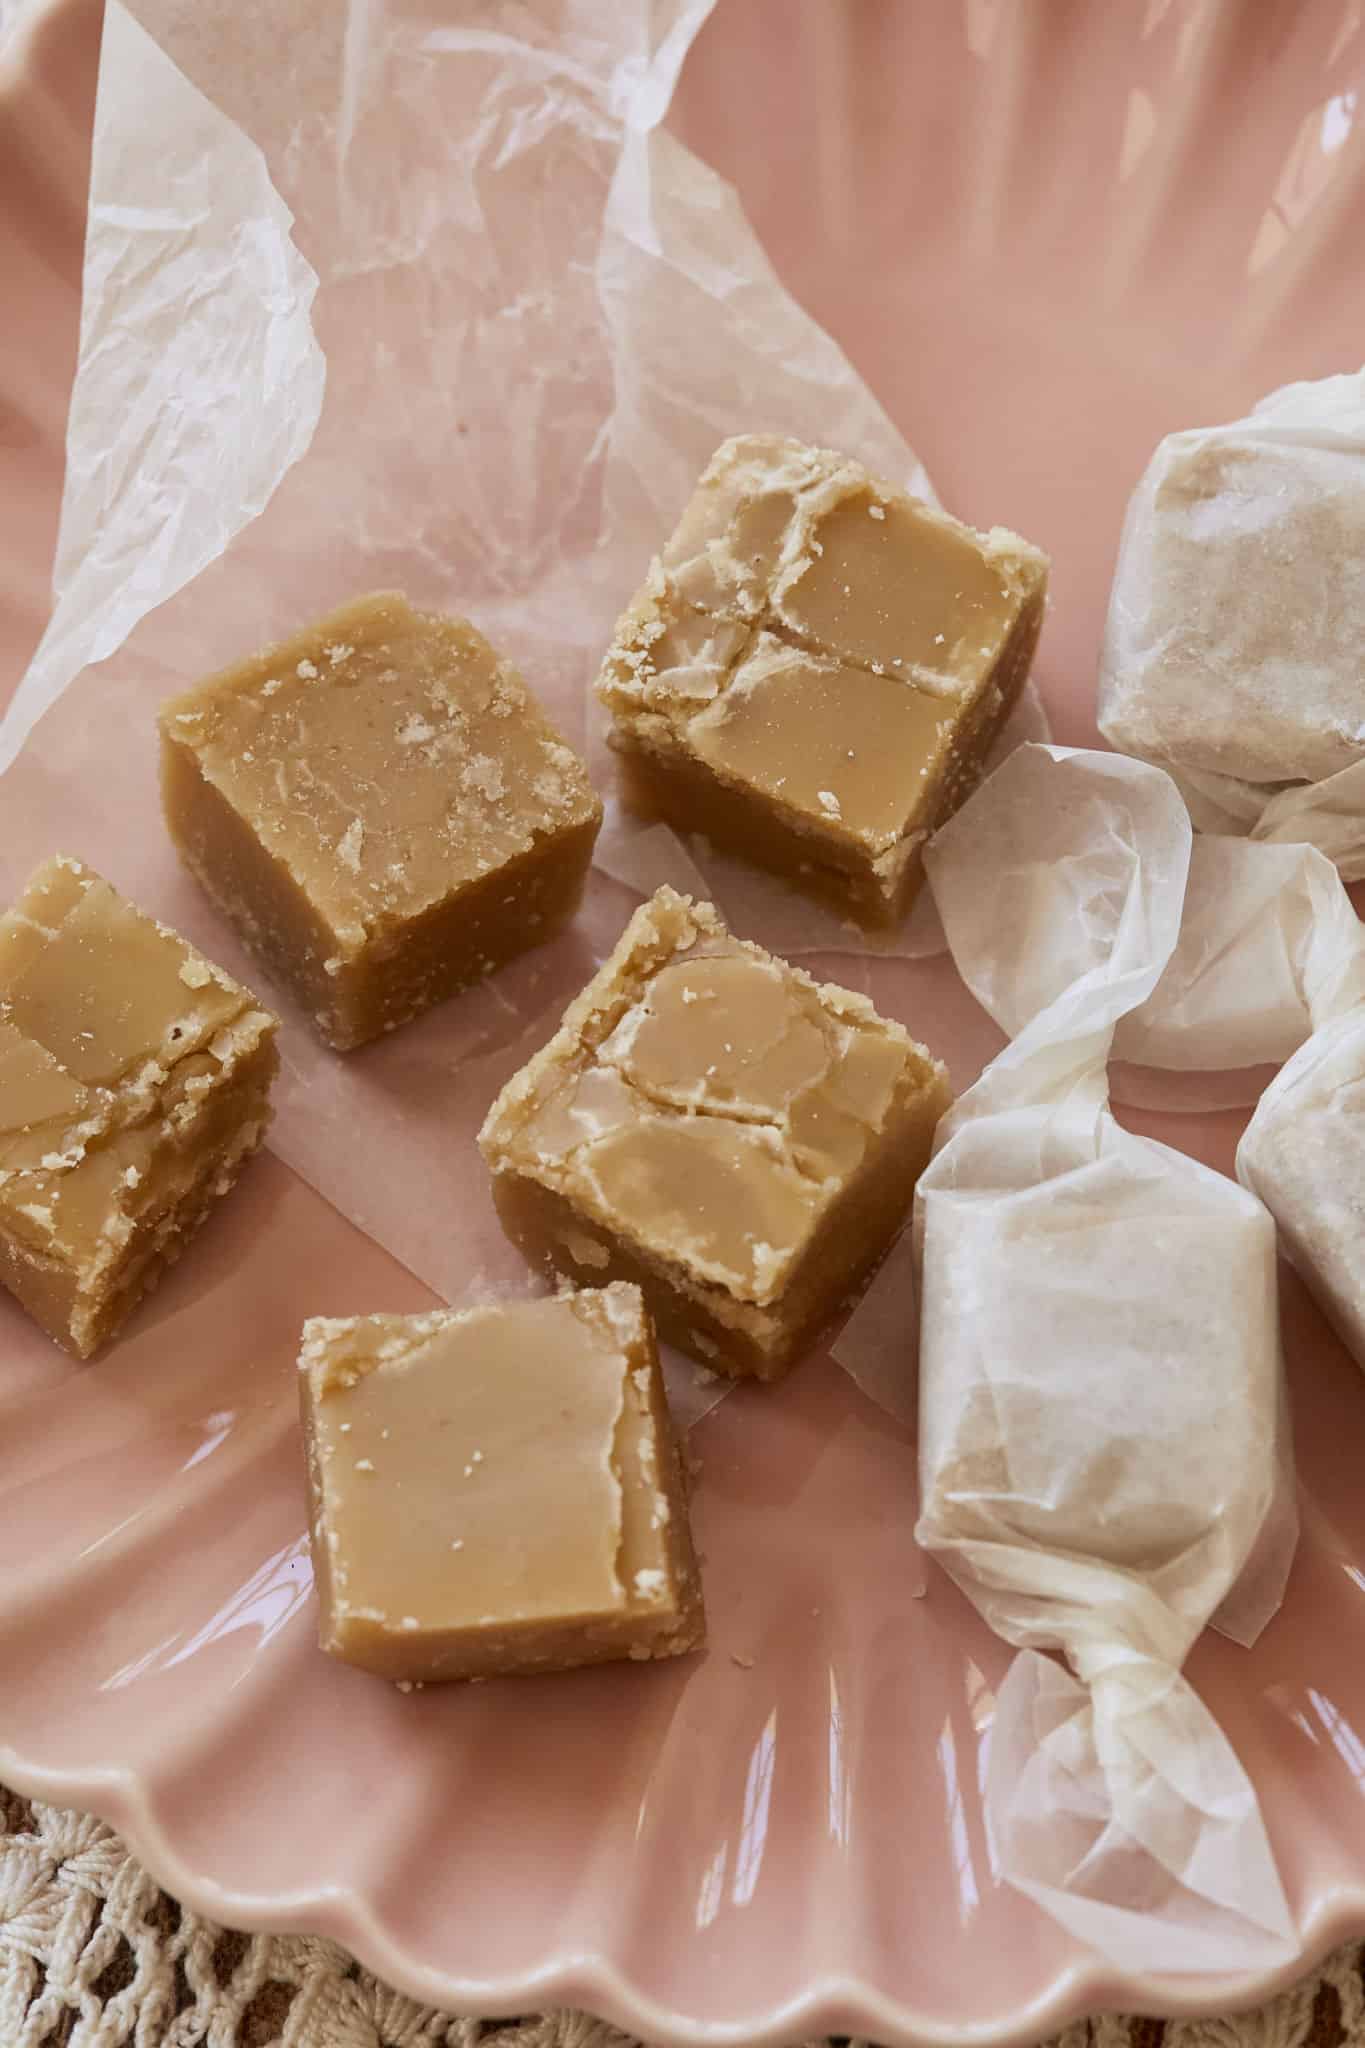 A closeup image of the maple candy shows that it almost has a fudge-like texture. 